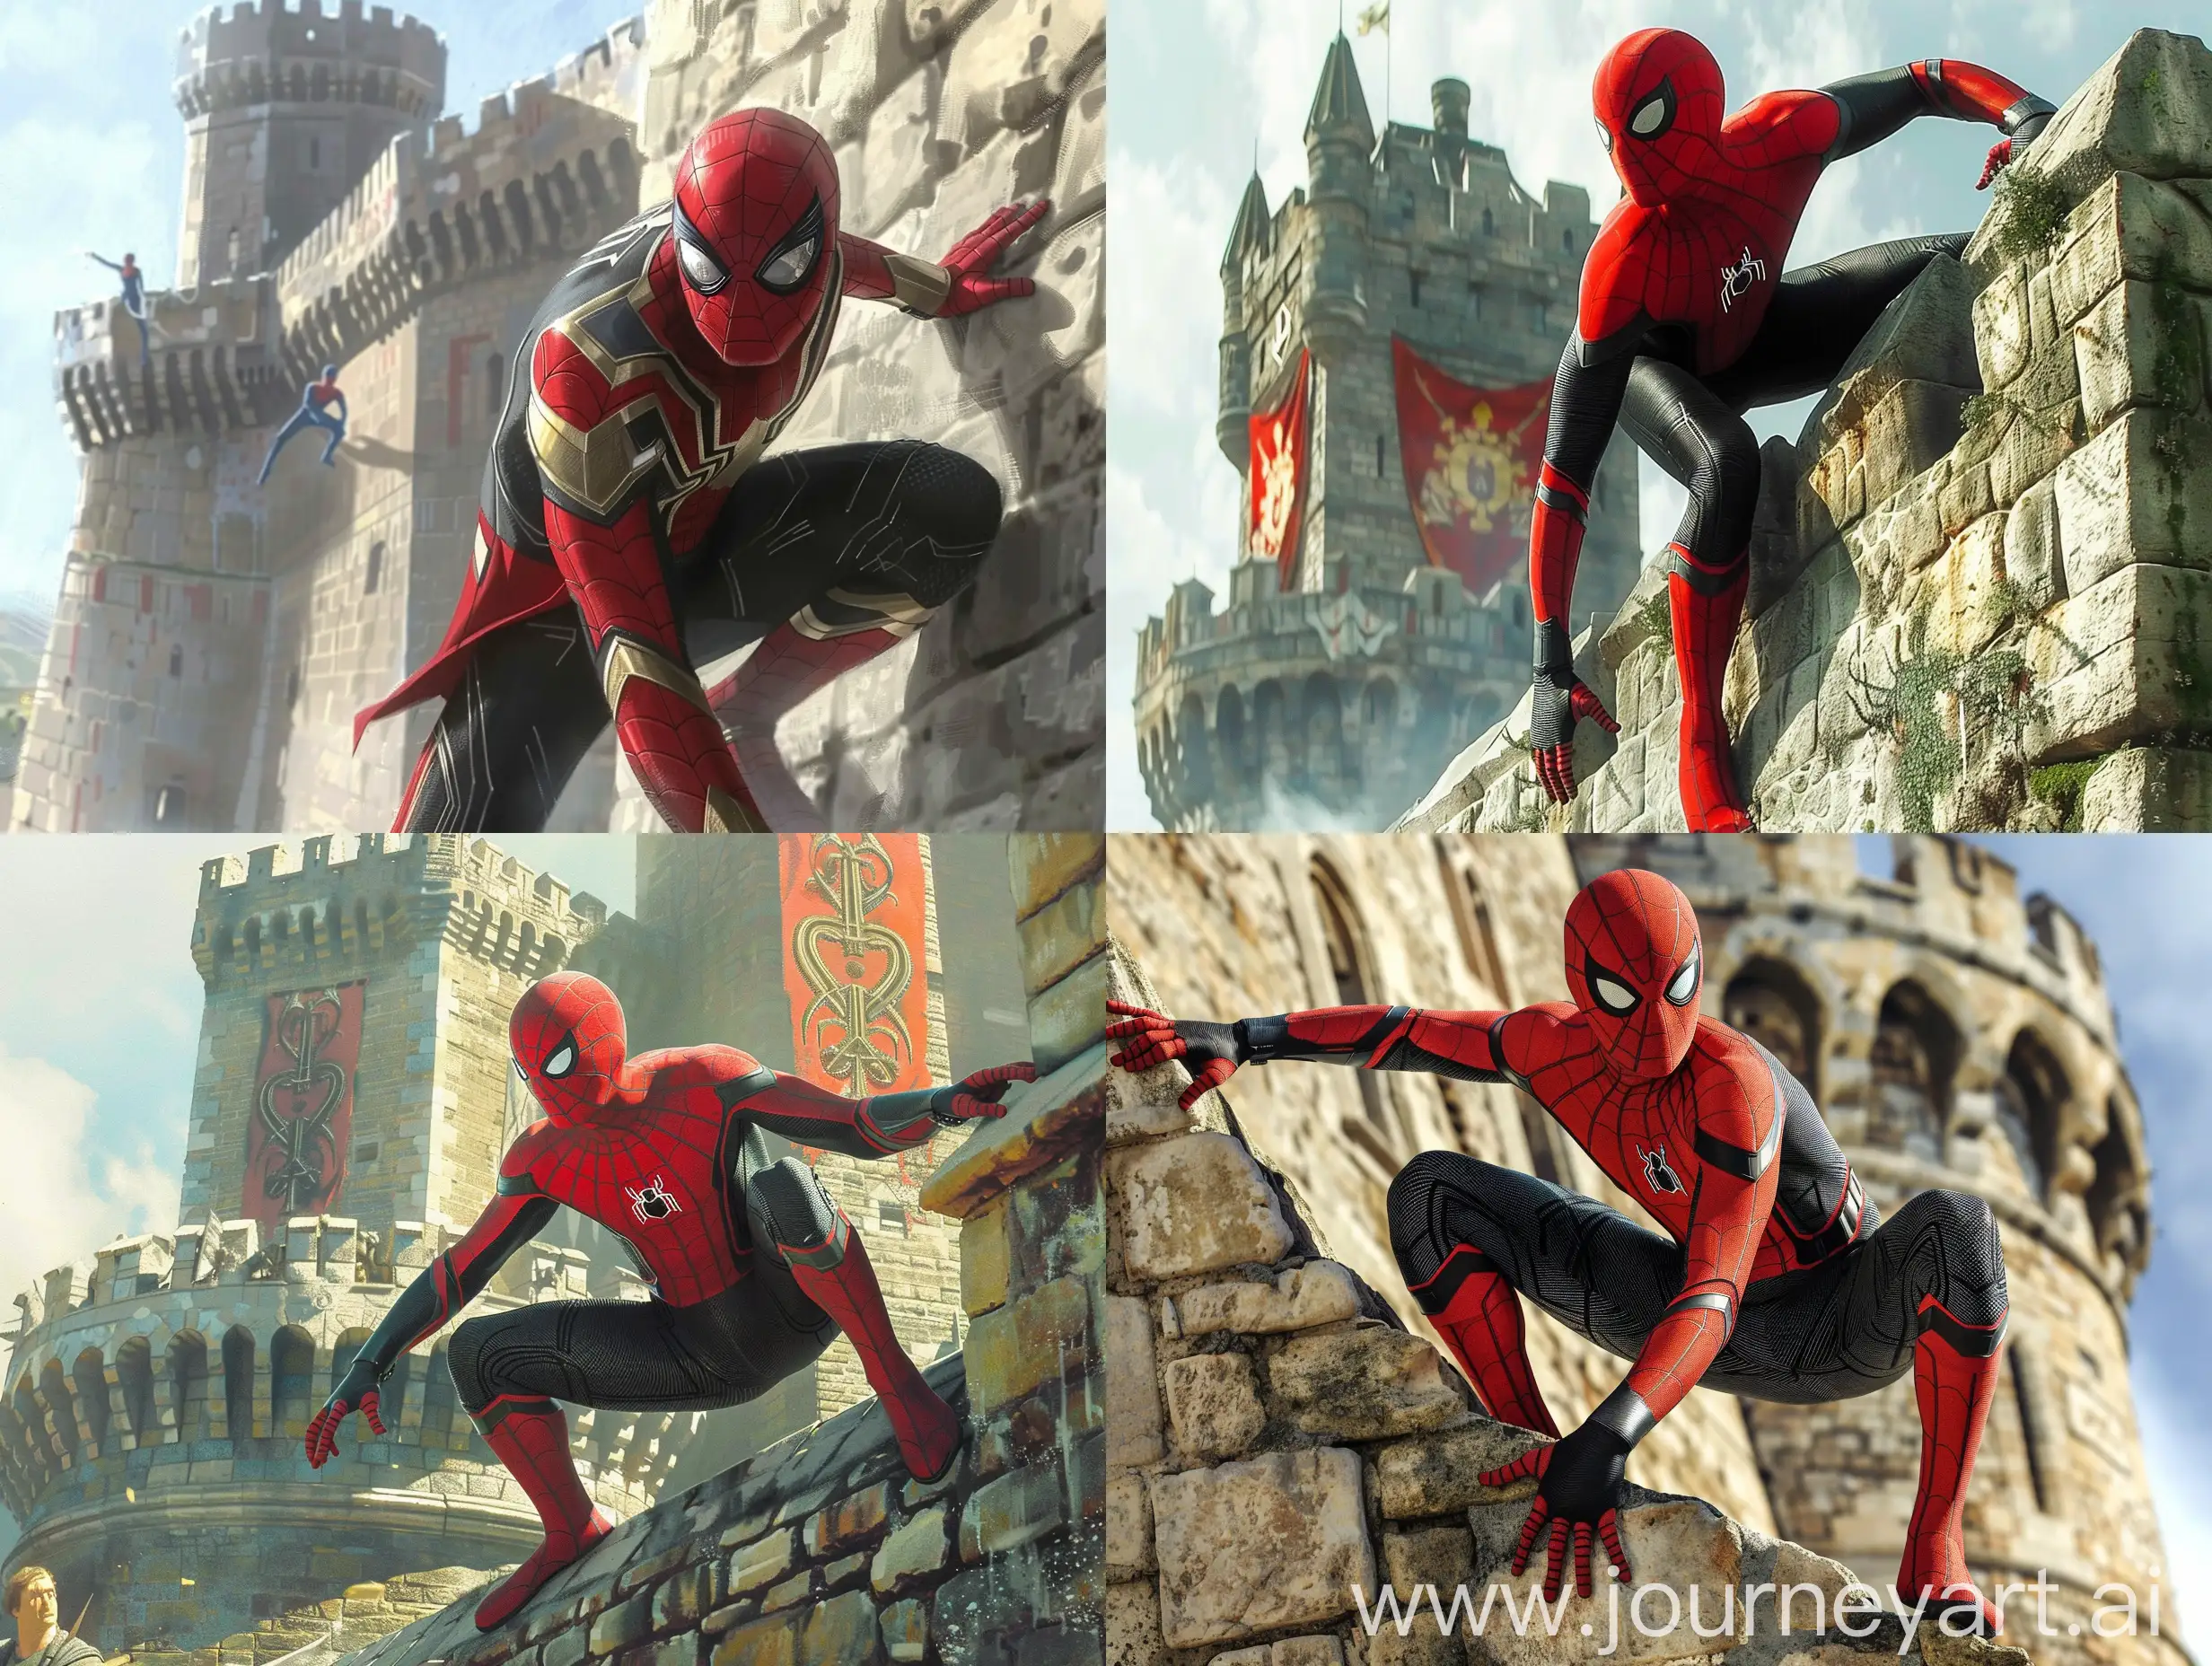 SpiderMan-Climbing-Camelot-Palace-Wall-in-15th-Century-Military-Uniform